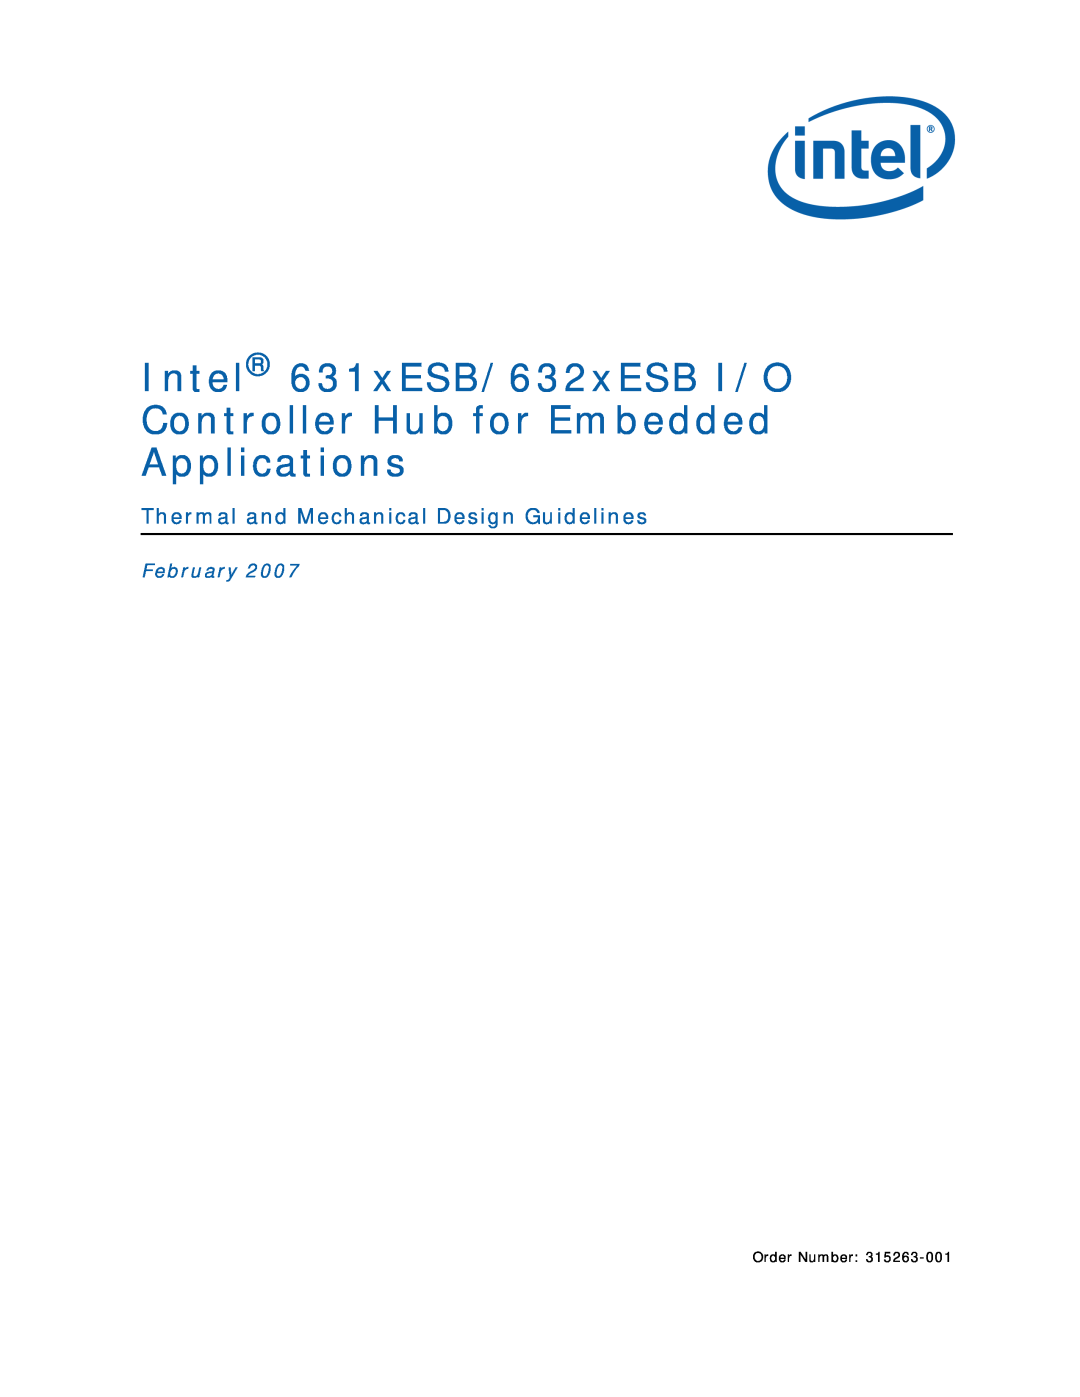 Intel 632xESB, 631xESB manual Thermal and Mechanical Design Guidelines, February, Order Number 